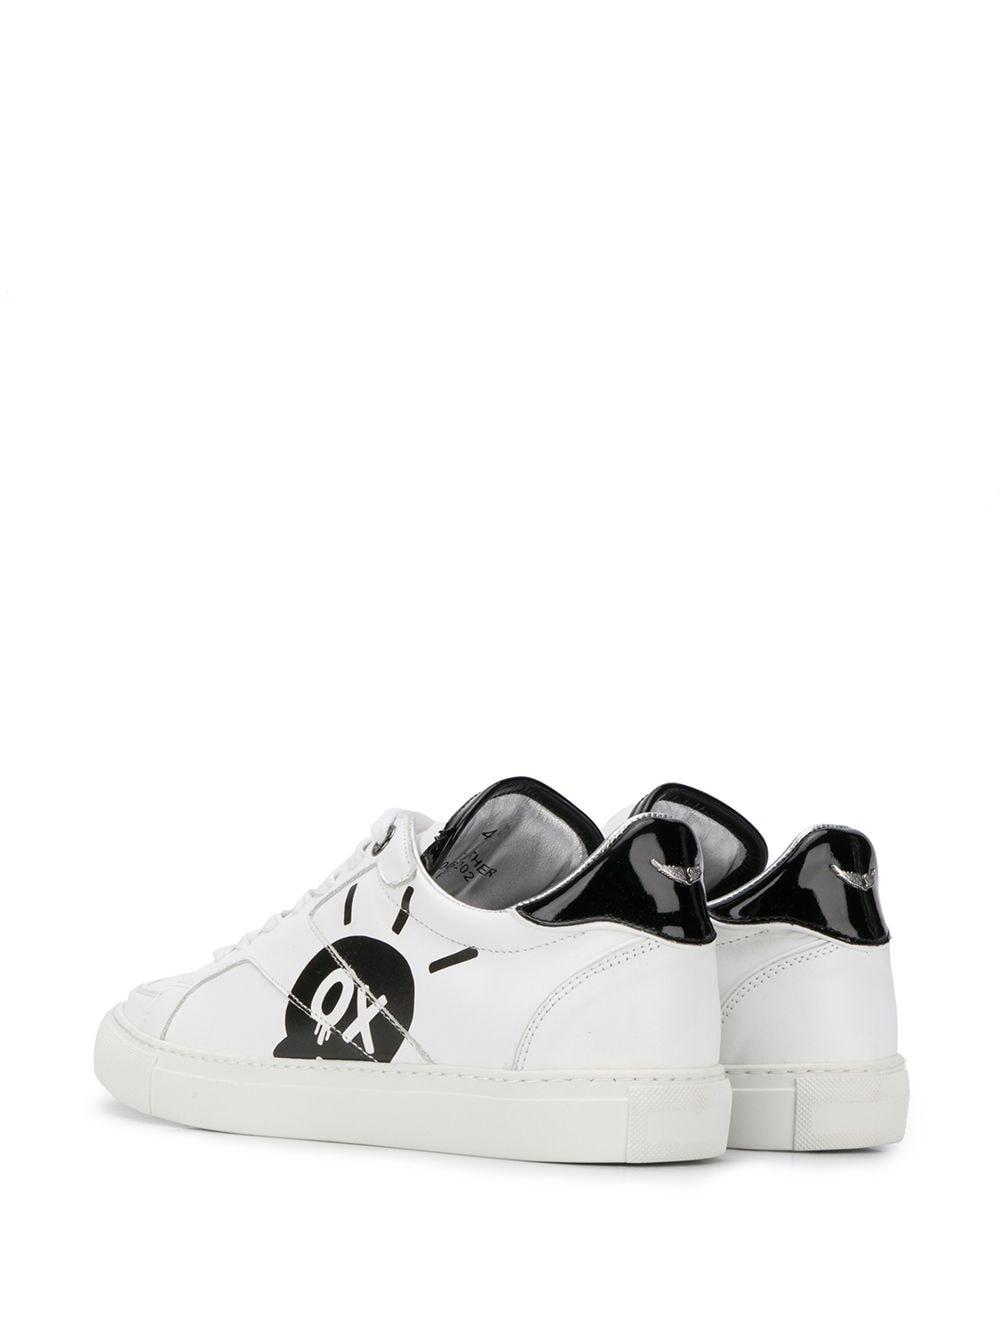 Zadig & Voltaire Zv1747 Amour Low-top Sneakers in White | Lyst